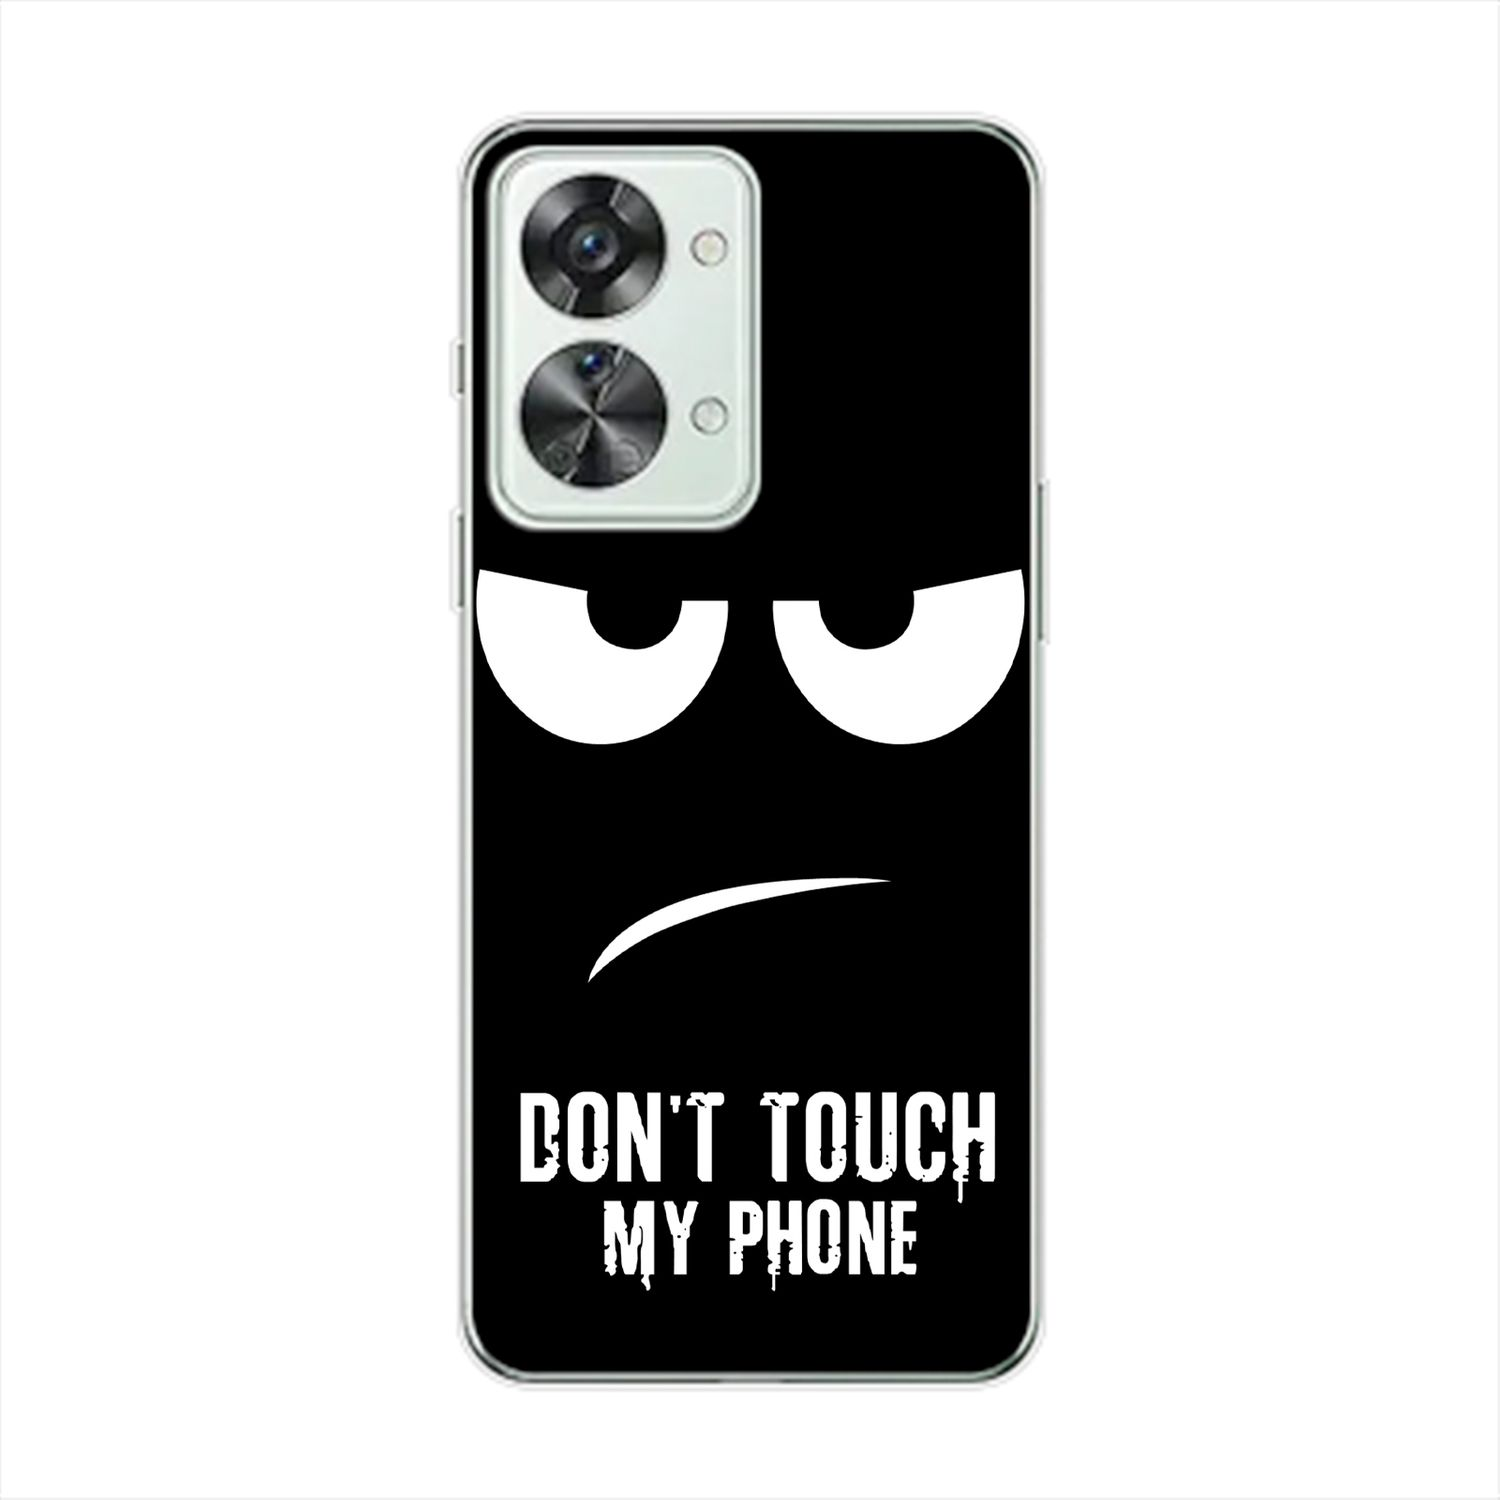 Backcover, DESIGN My Phone Nord Touch Dont Case, KÖNIG 2T, Schwarz OnePlus,